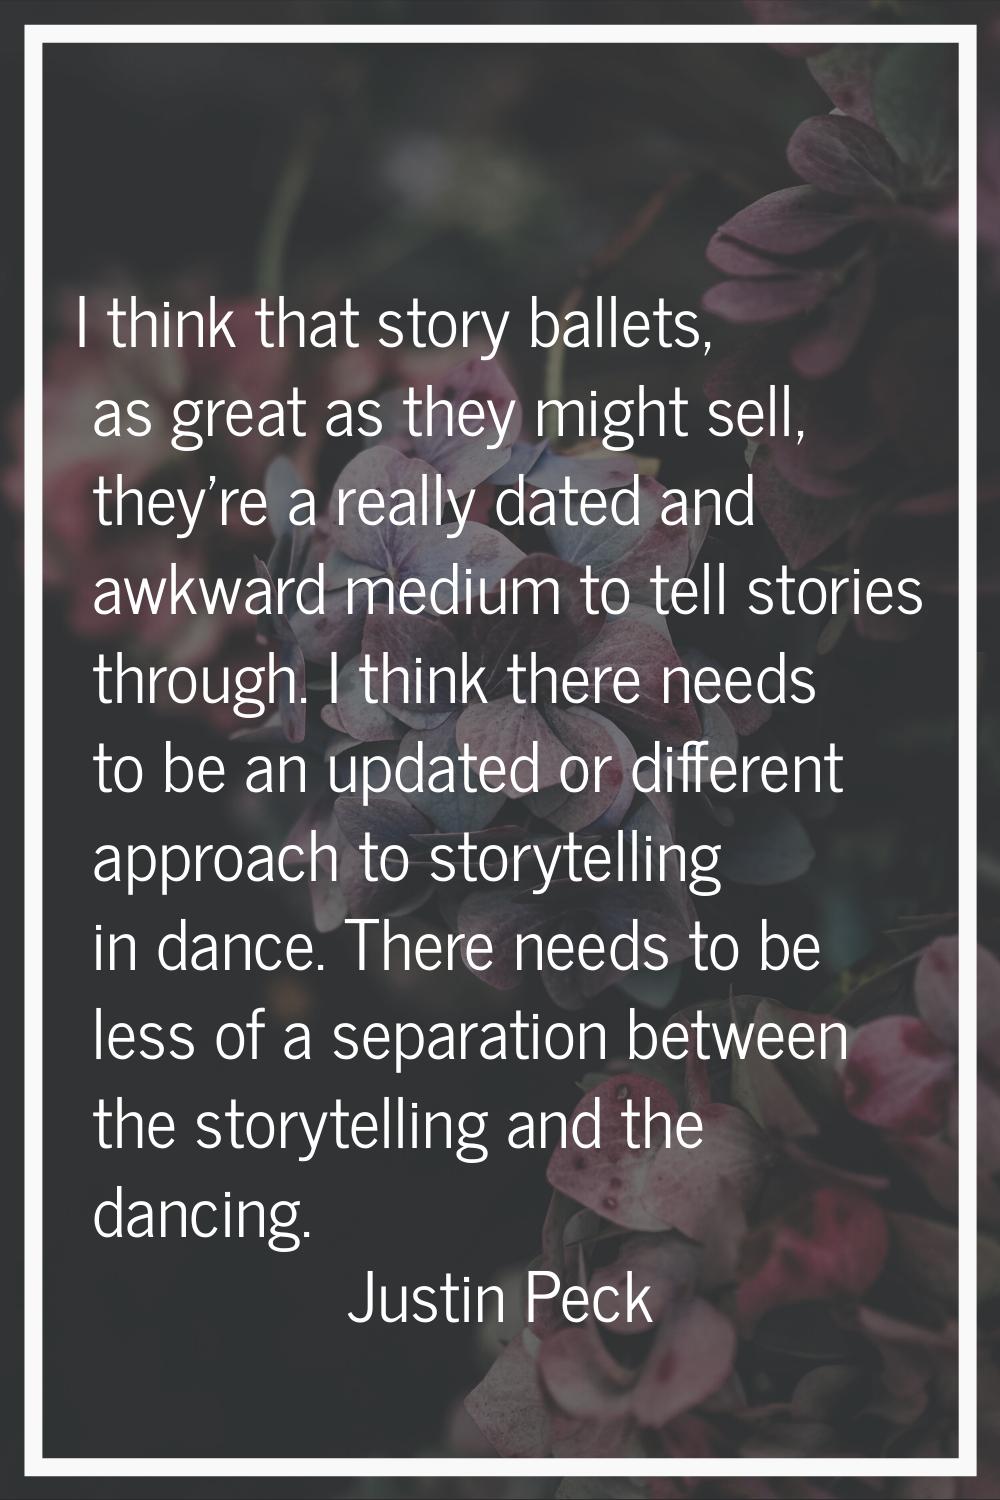 I think that story ballets, as great as they might sell, they're a really dated and awkward medium 